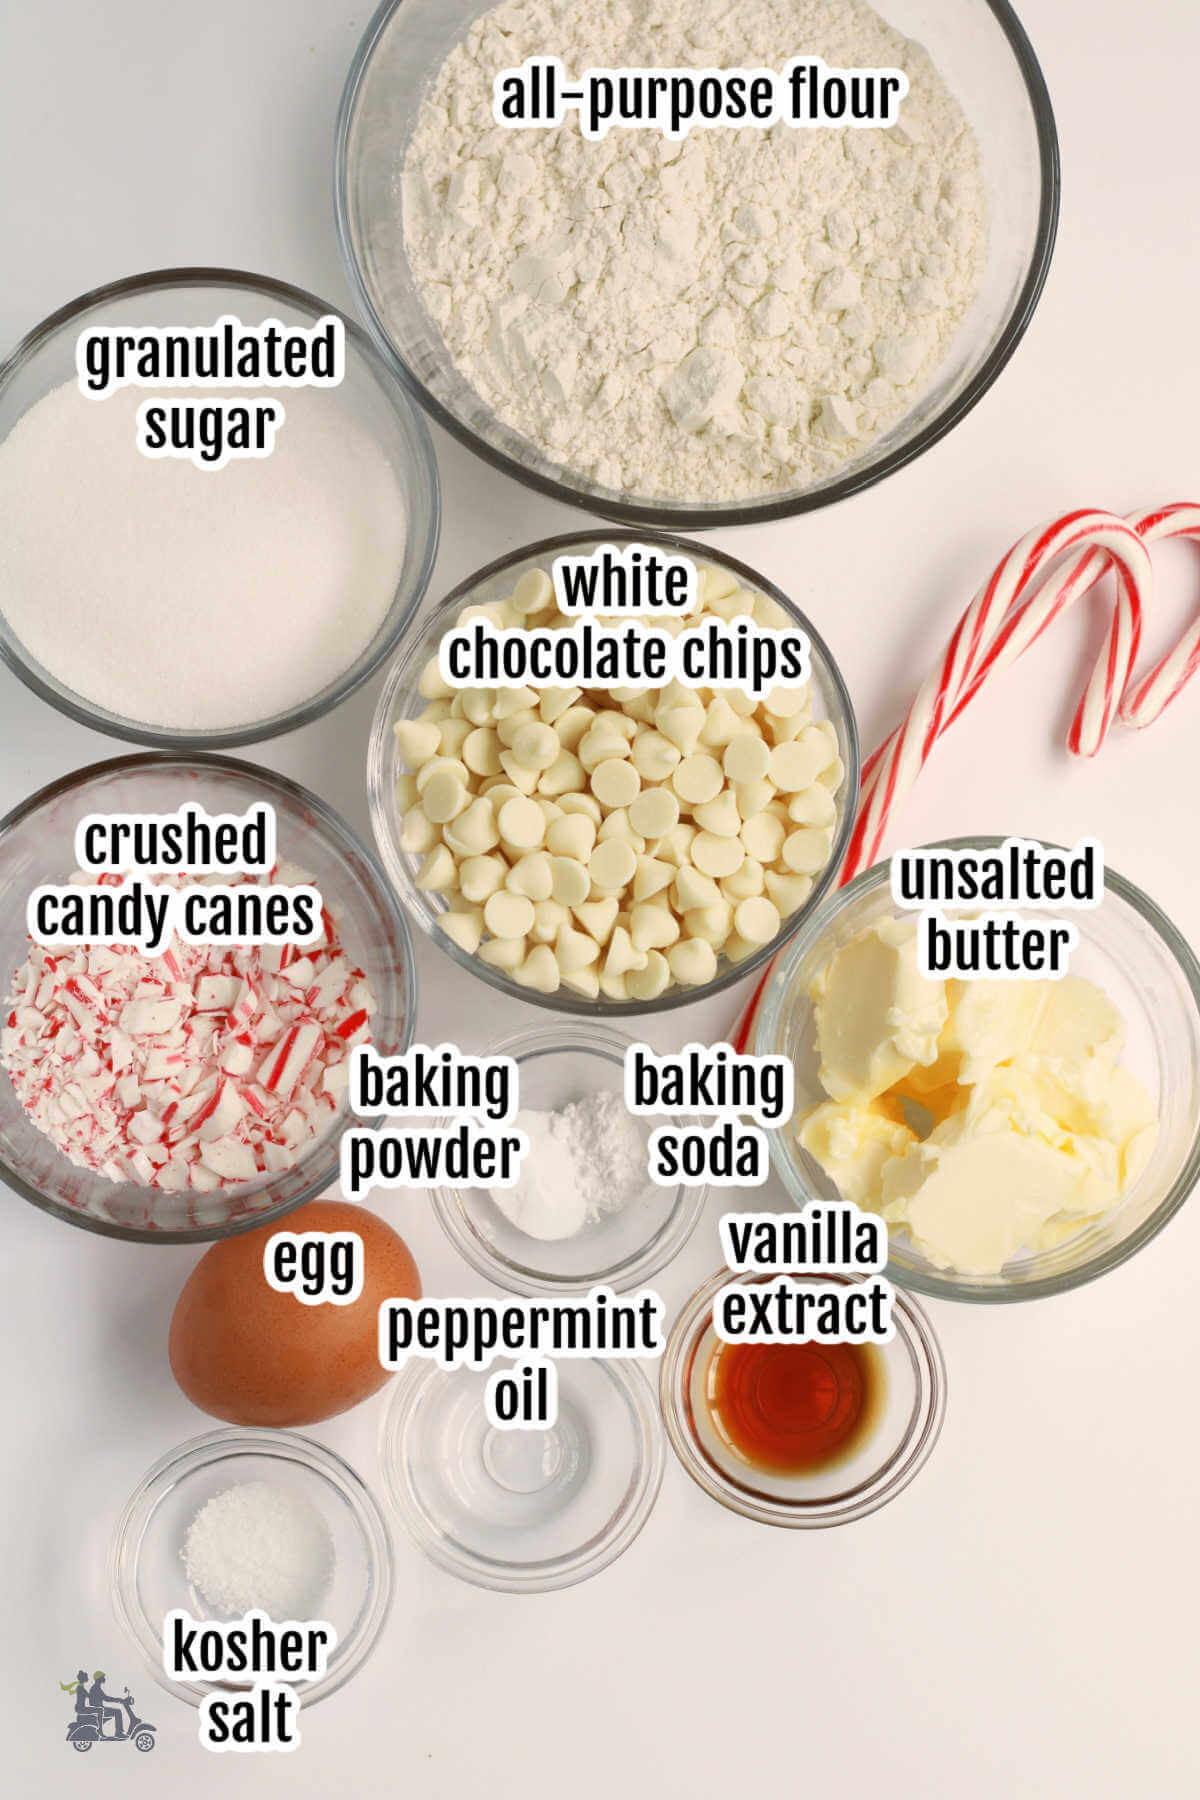 Image of ingredients needed to make the Christmas Peppermint White Chocolate Chip Cookies.